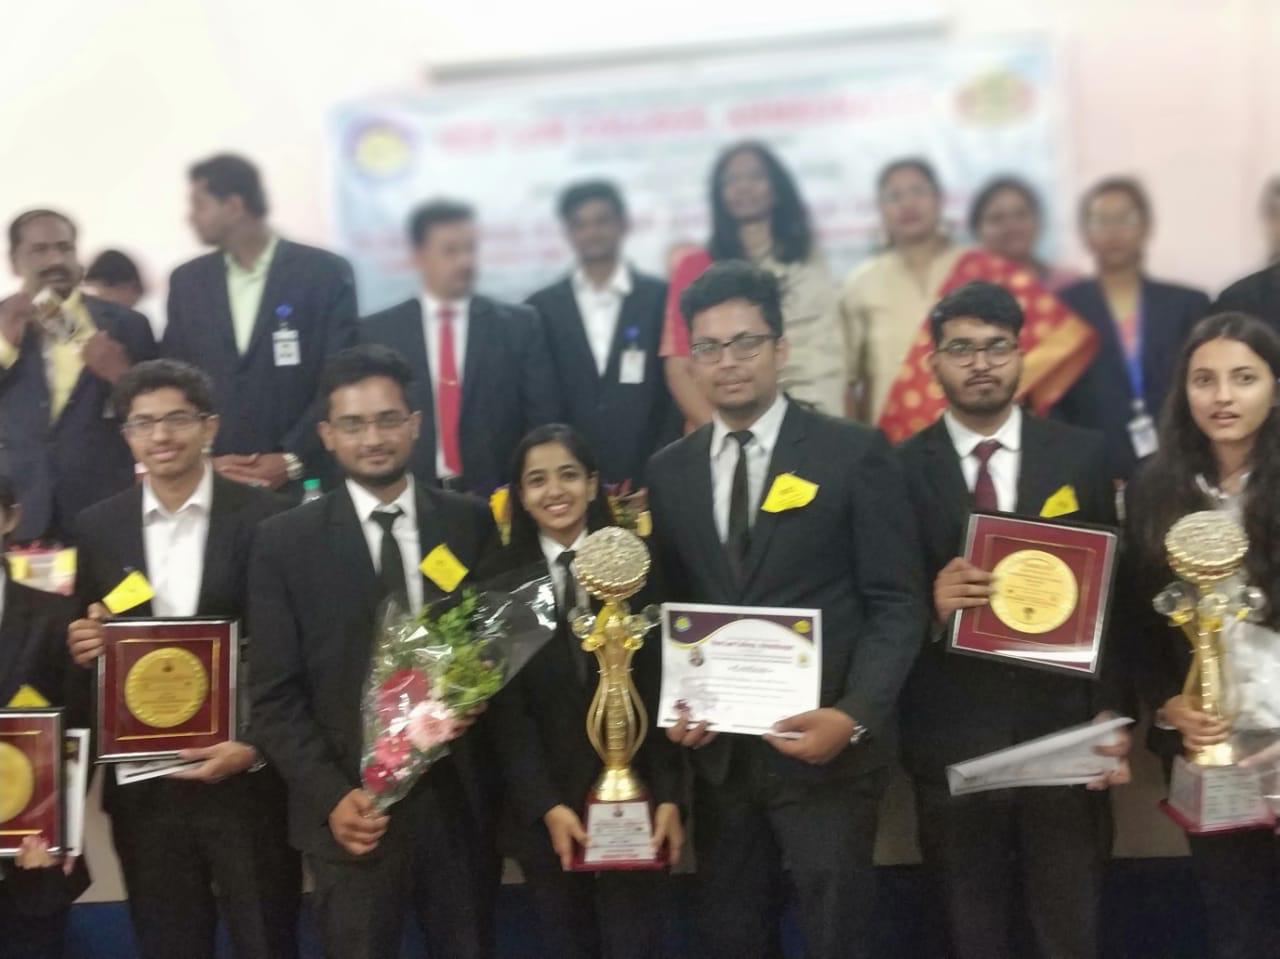 Moot court competition, Ahmednagar